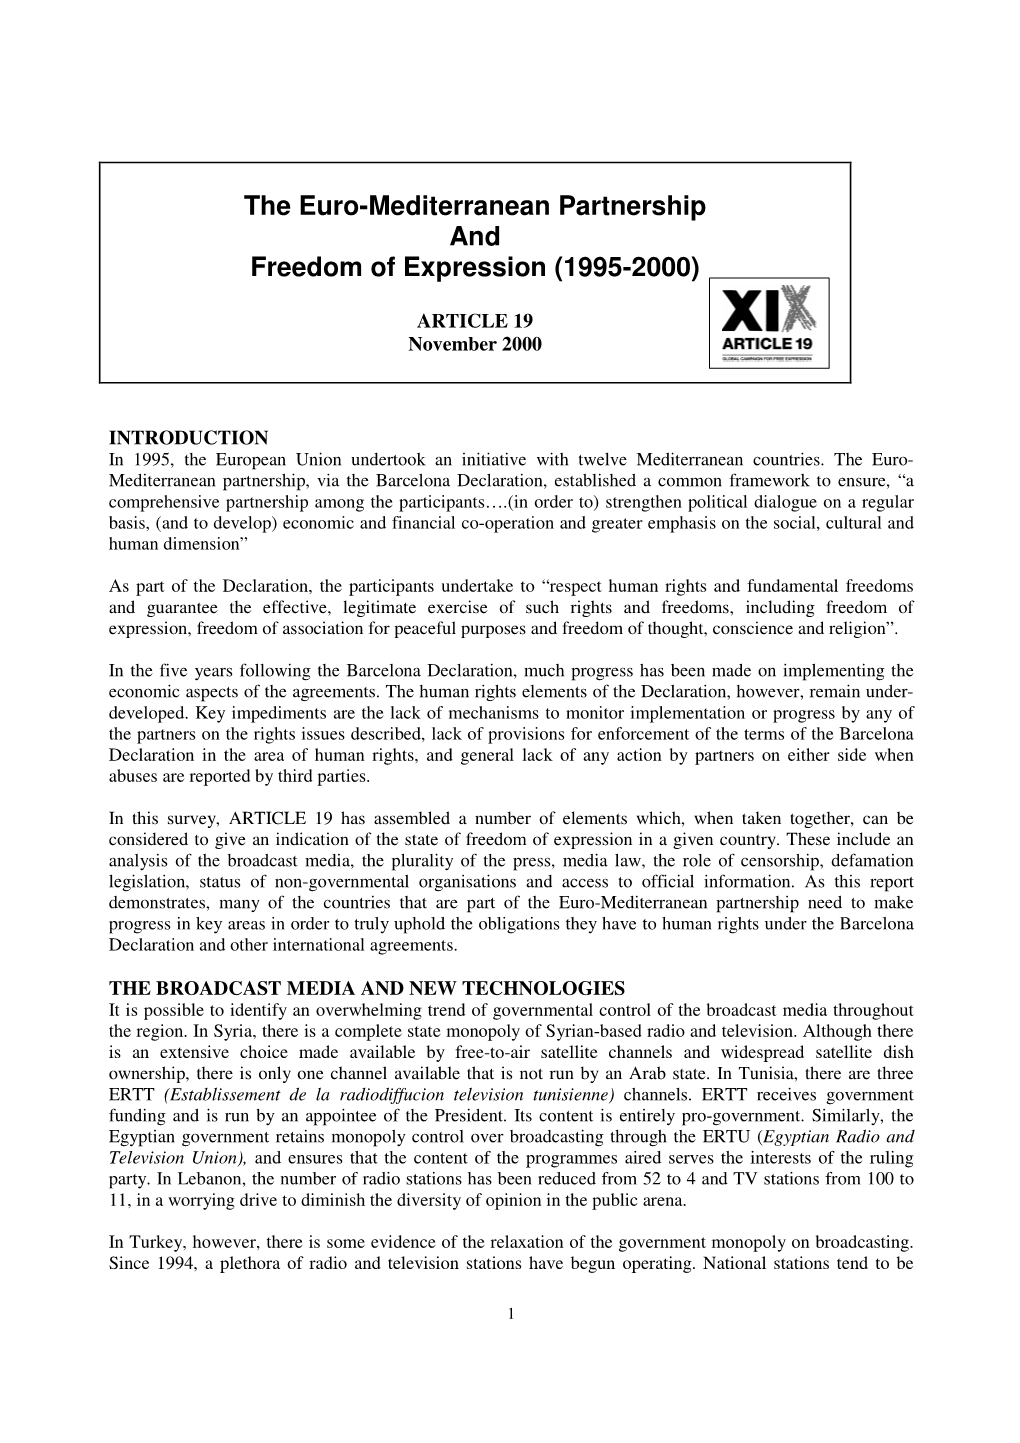 The Euro-Mediterranean Partnership and Freedom of Expression (1995-2000)